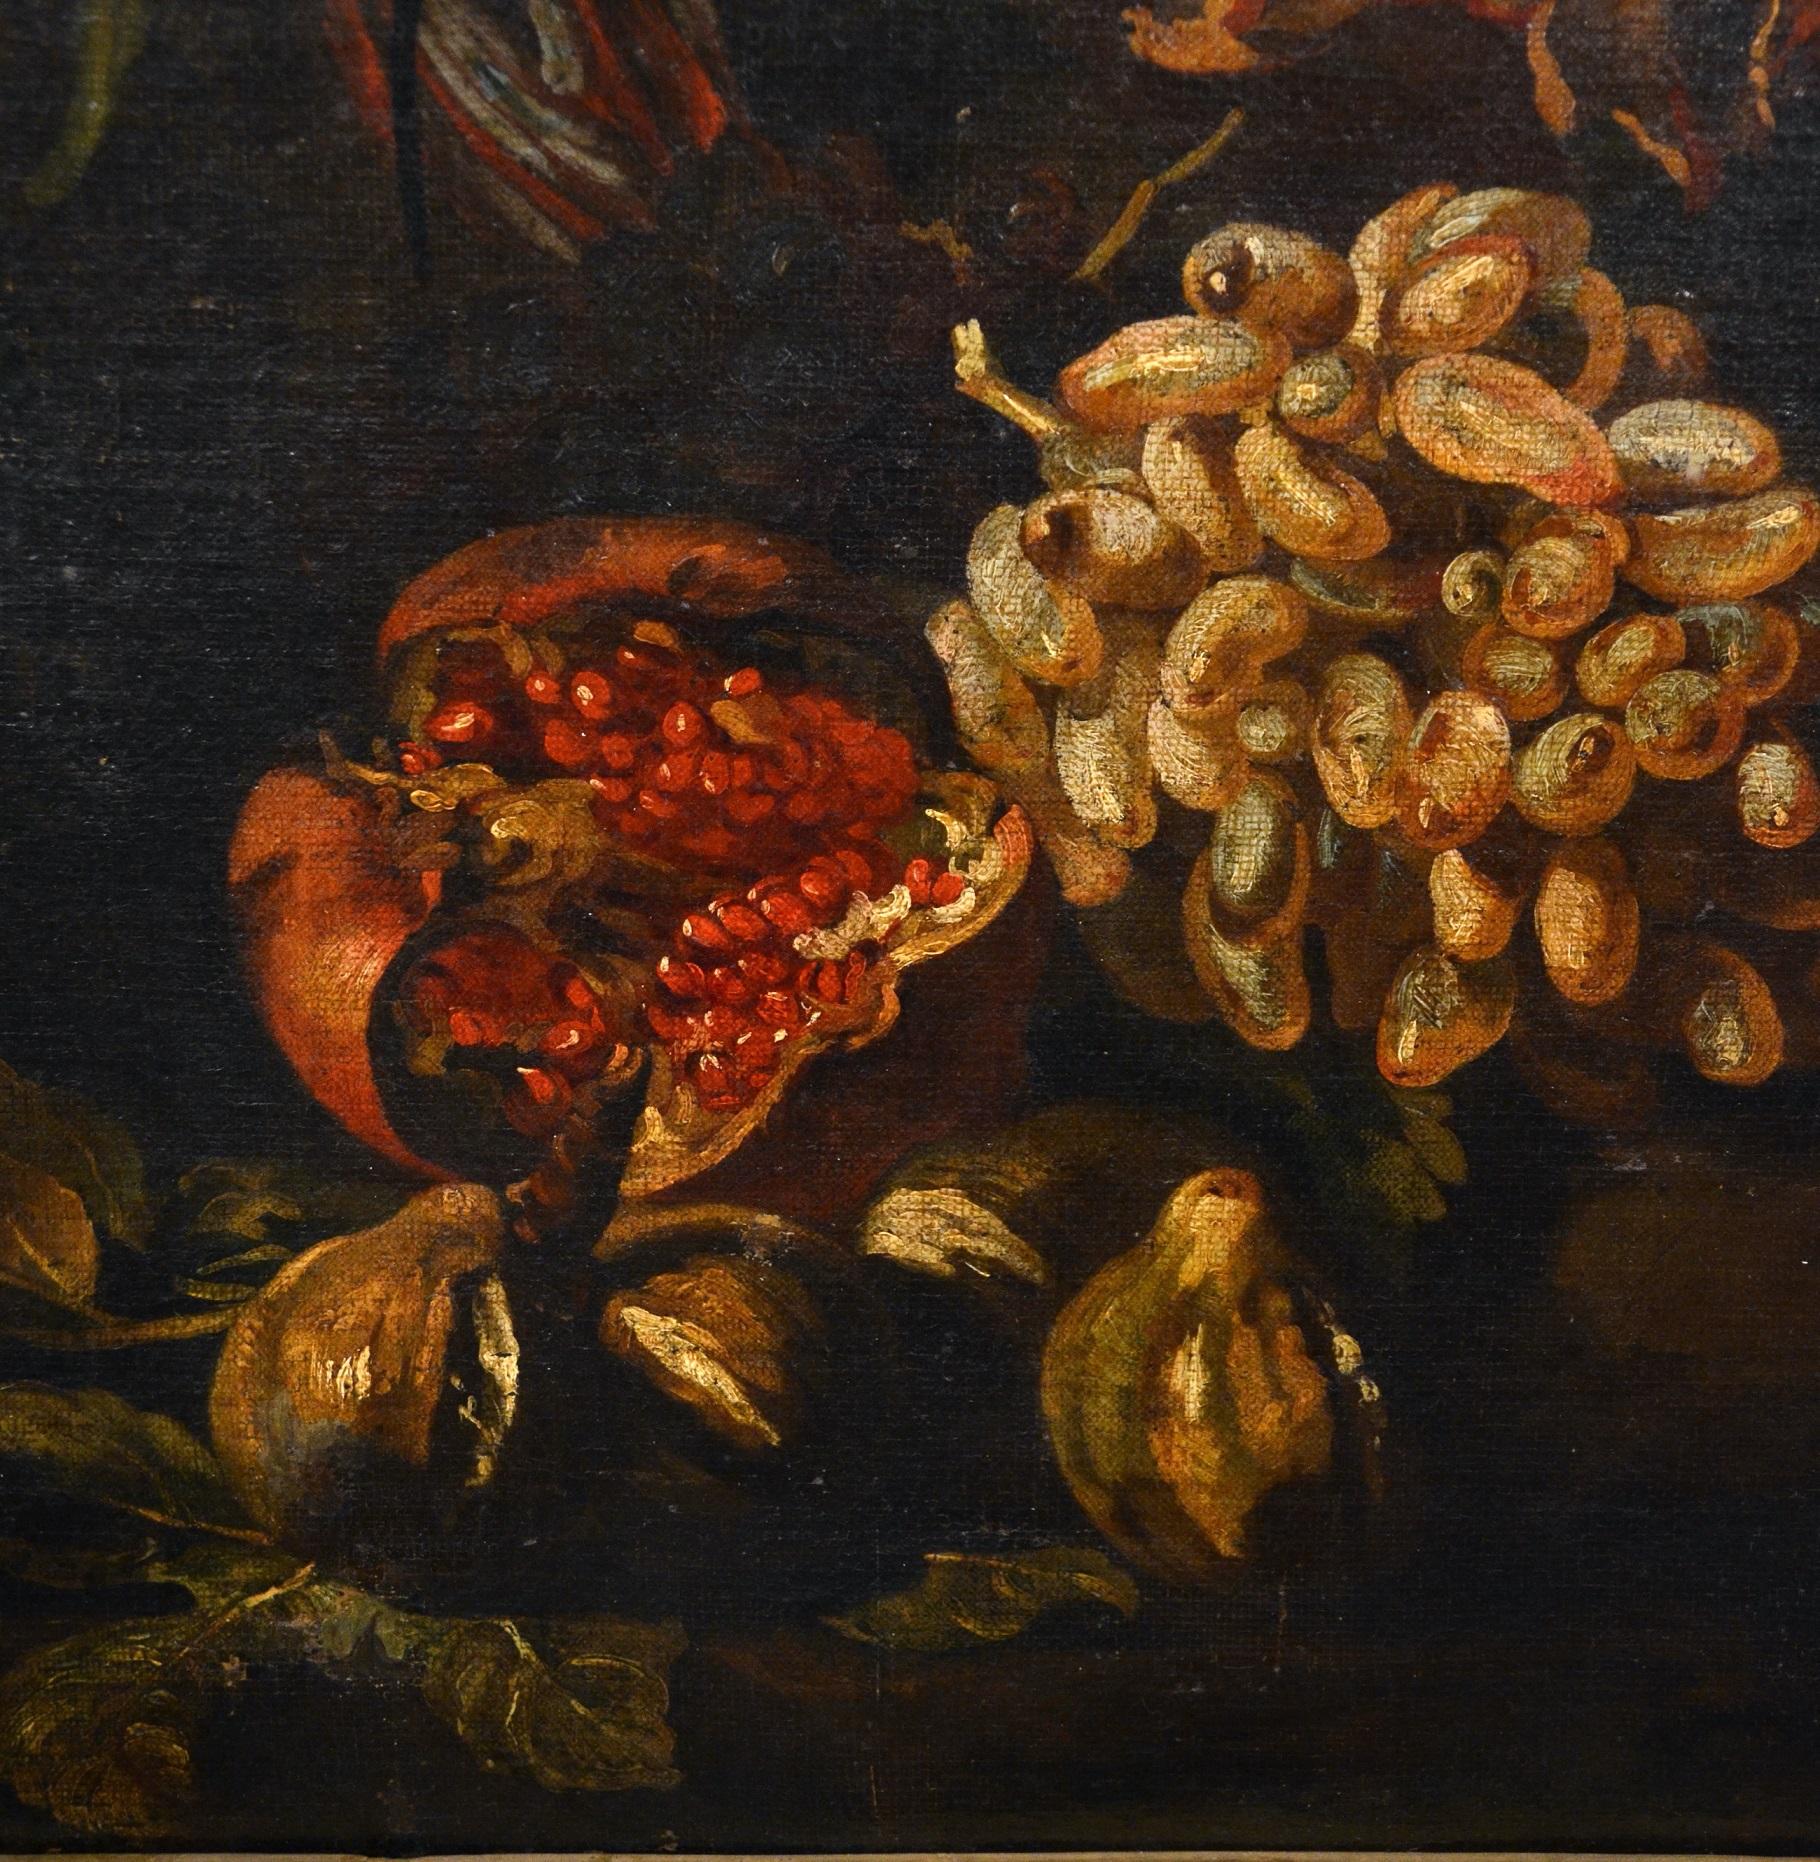 Aniello Ascione (Naples, news from 1680 to 1708)
Still life with festoon of flowers and fruit
Oil painting on canvas,
89 x 117 cm
in frame cm 109 x 137
With expertise and attributive study by Prof. Stefano Causa (University of Naples)

'' This fruit